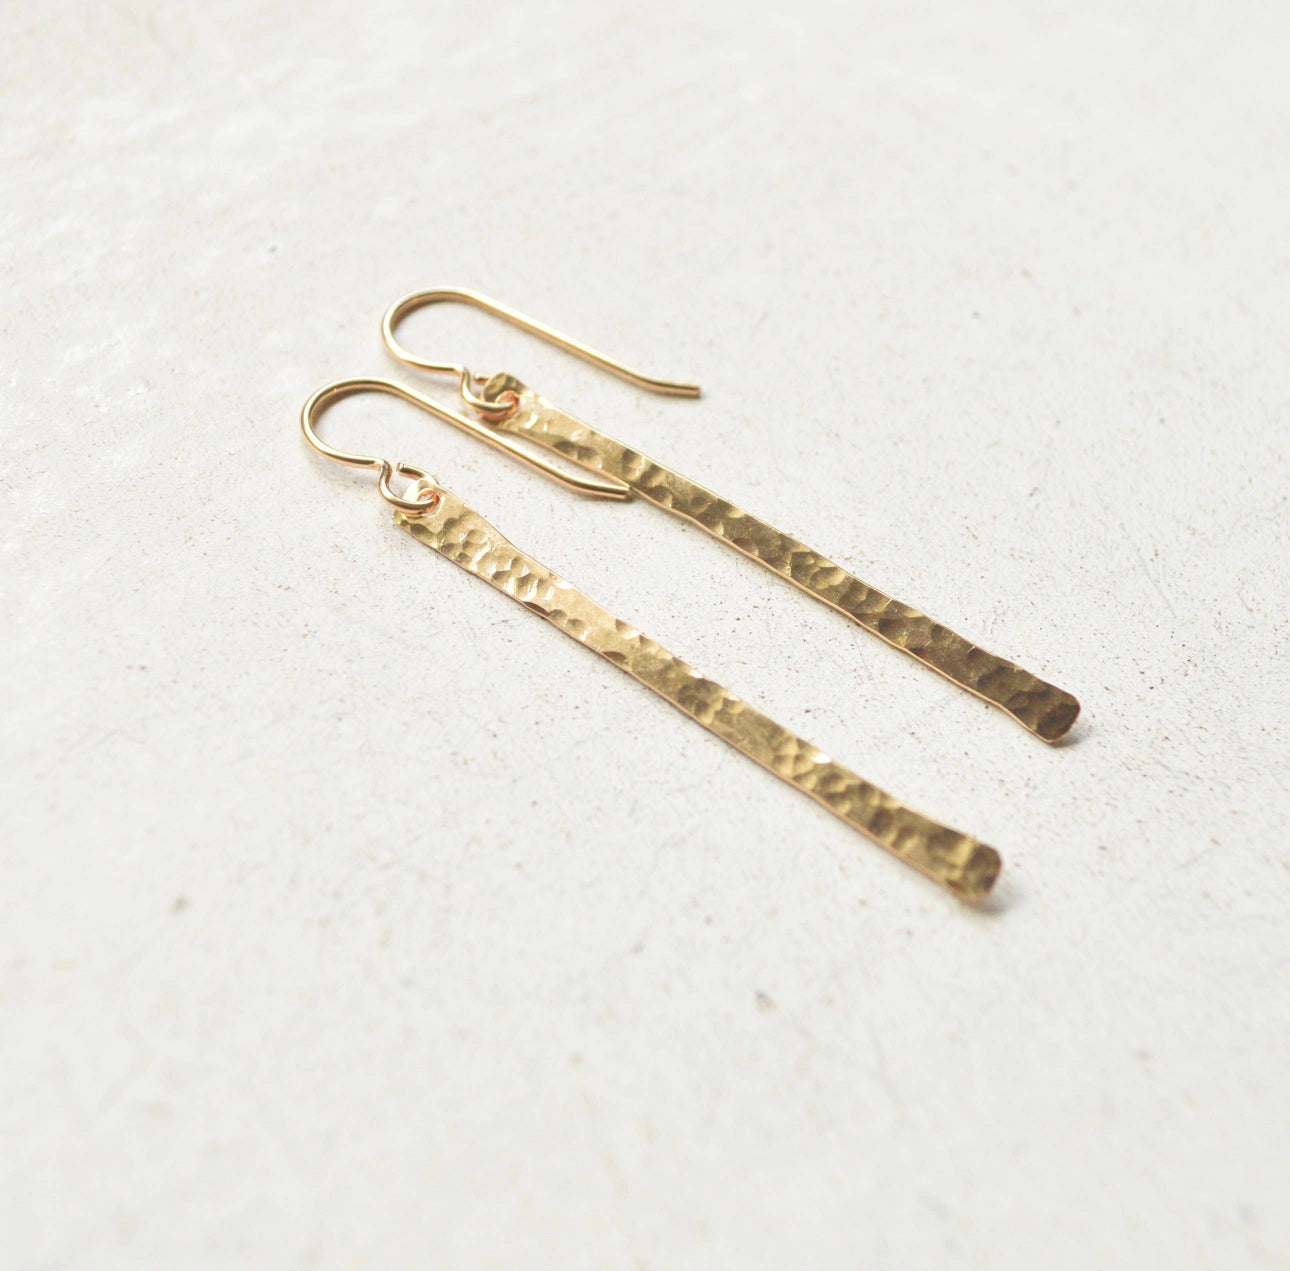 Hammered Bar Earrings that are Handmade in the USA